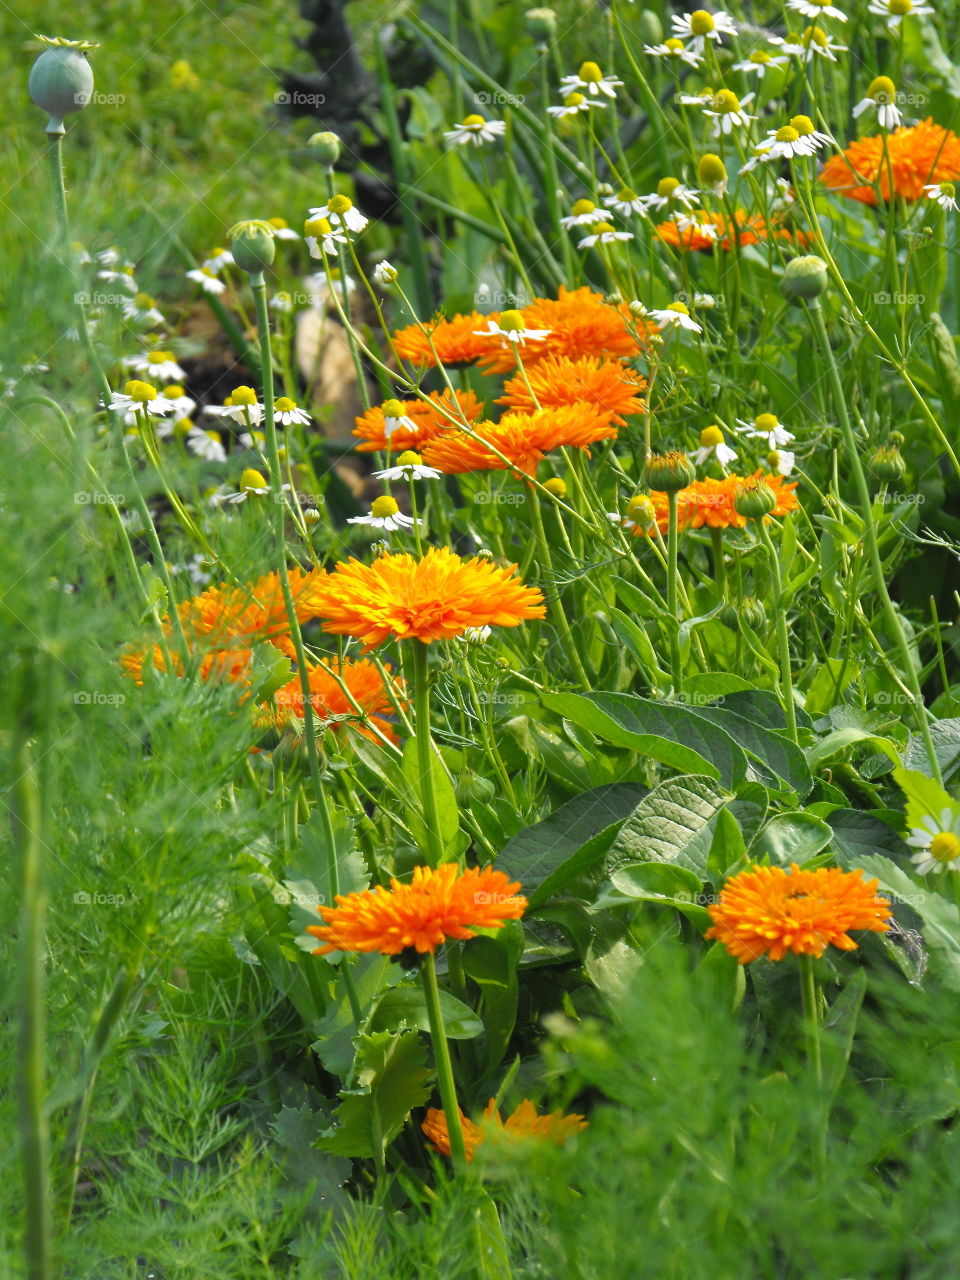 Marigolds and feverfews in the  garden